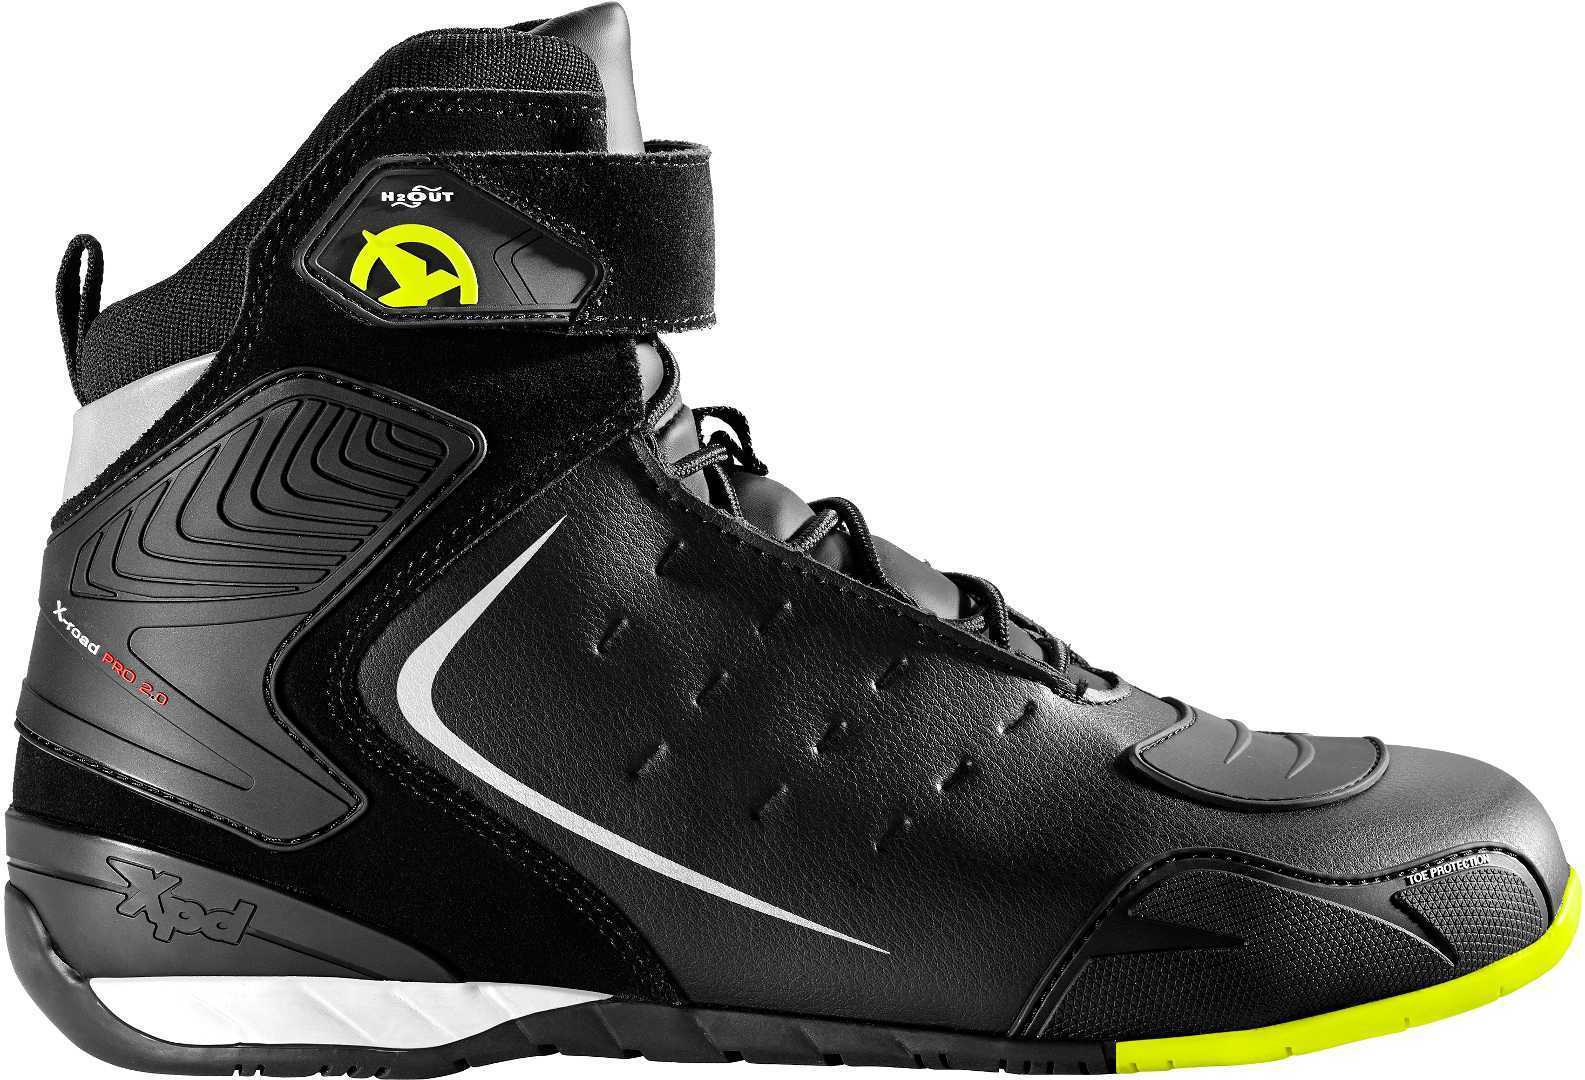 Image of XPD X-Road H2Out Yellow Fluo Size 45 EN